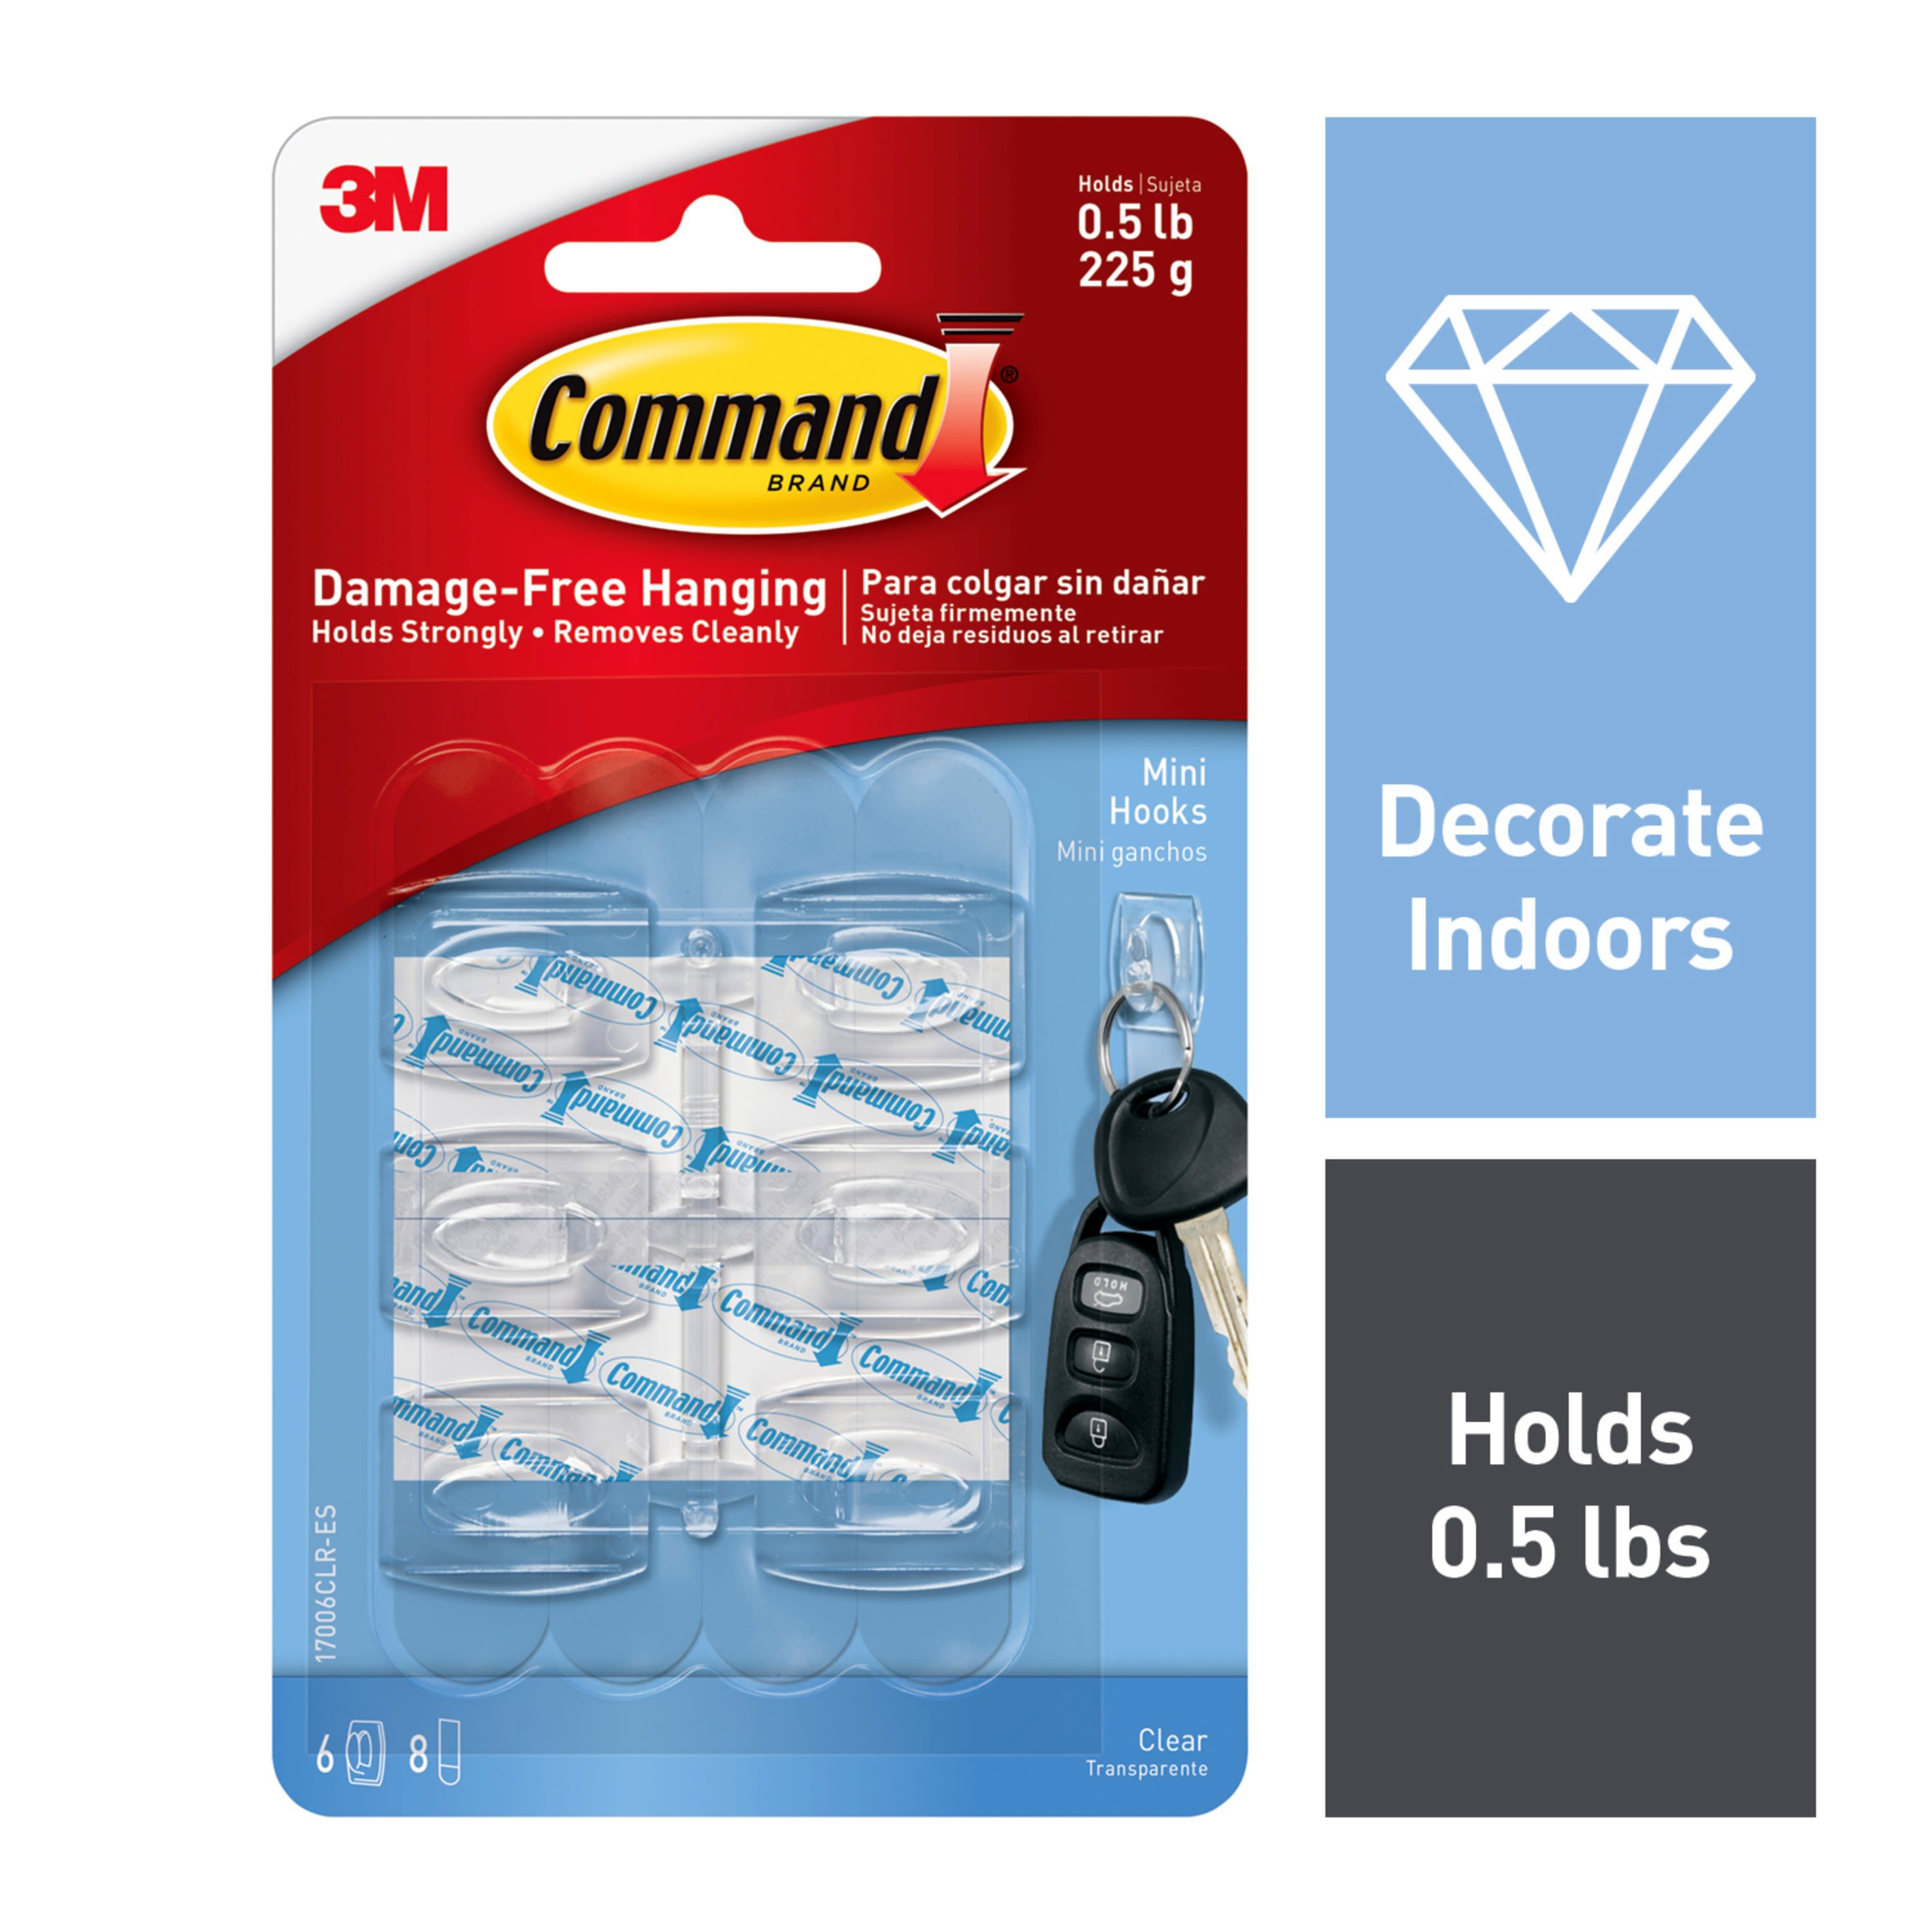 3M Command Hooks: A Simple Yet Strong Storage Solution